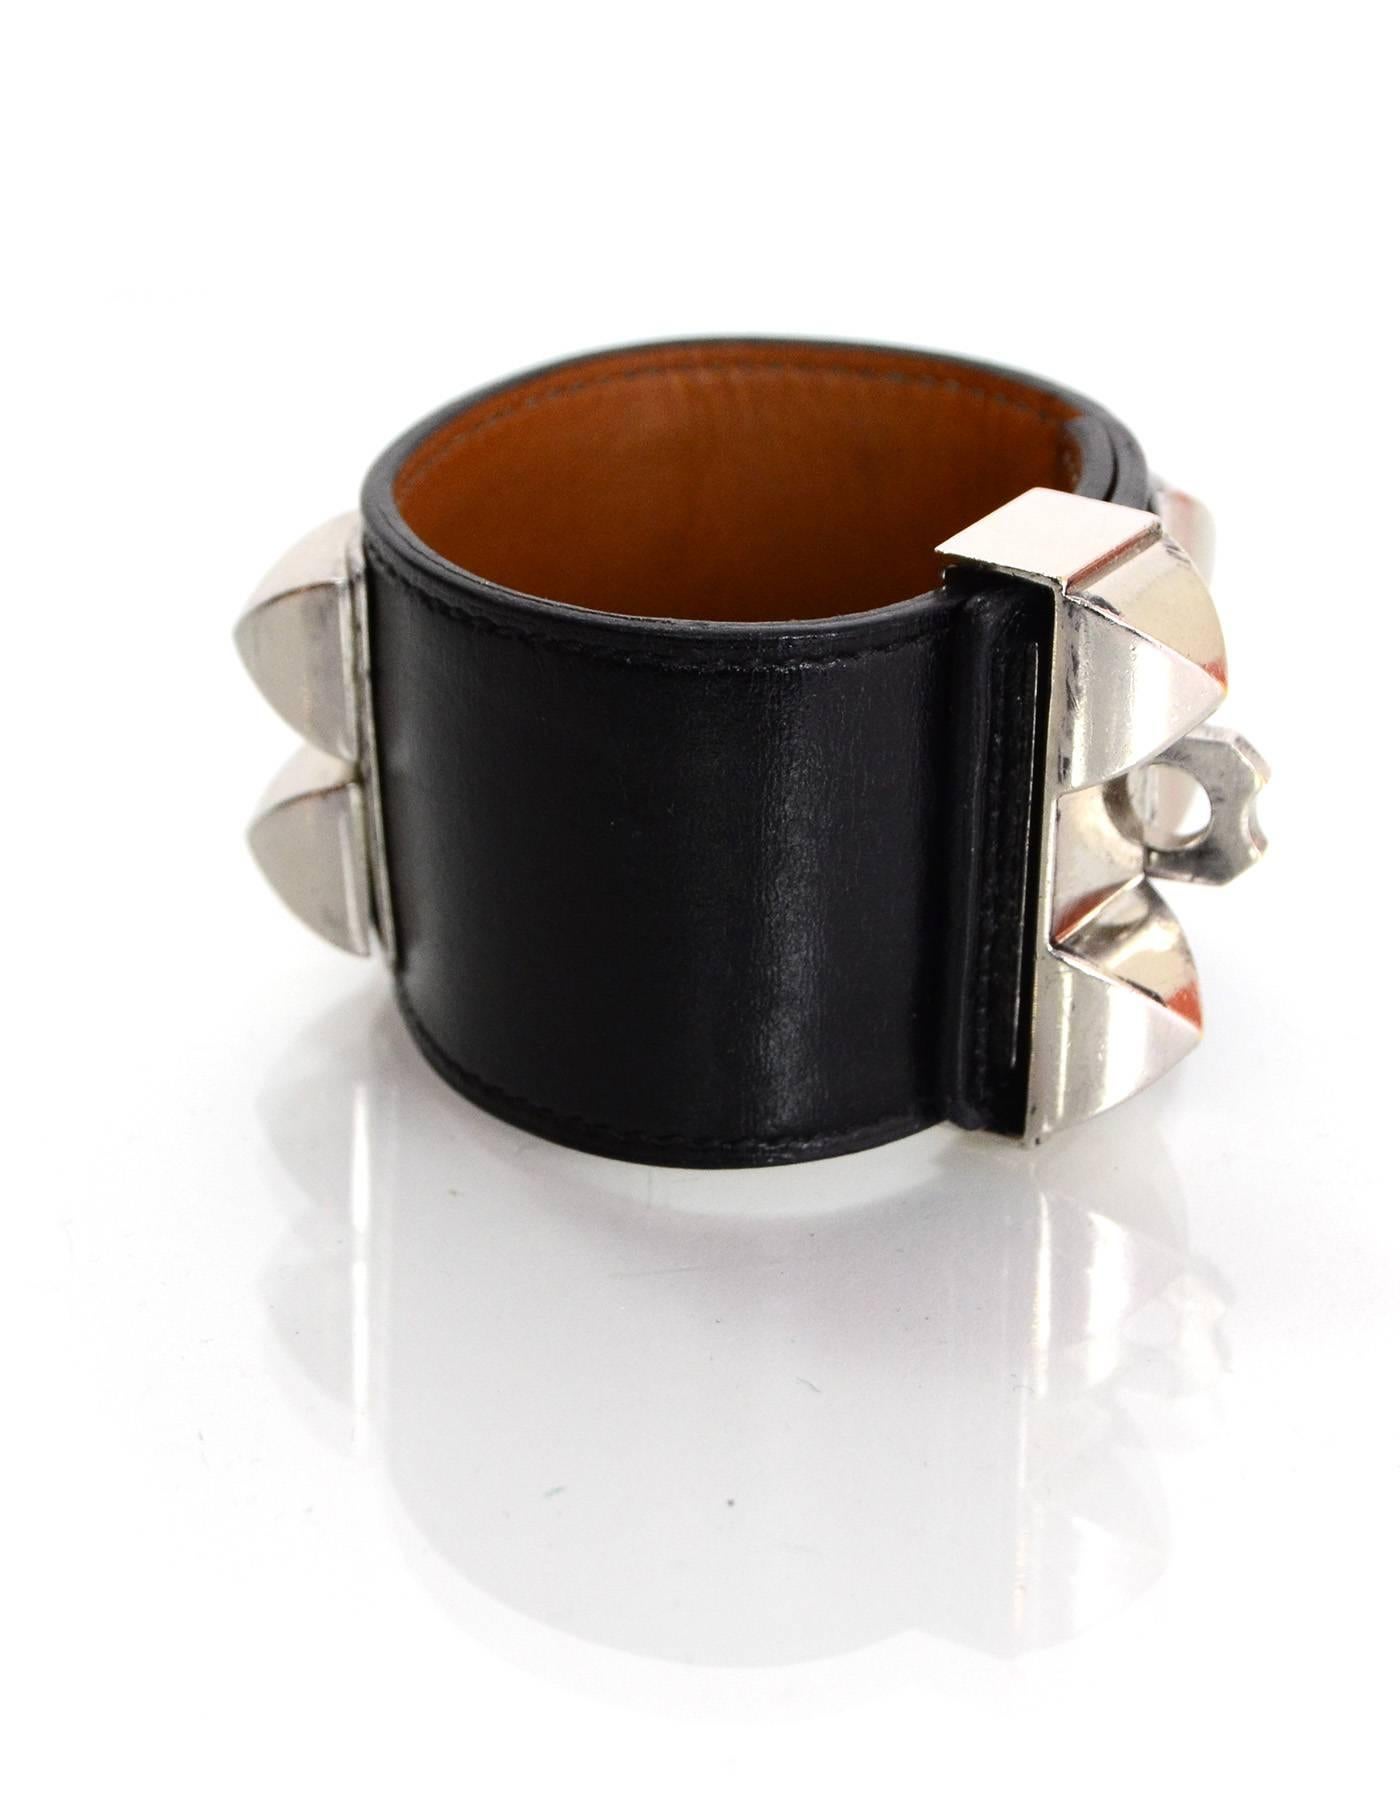 Hermes Black Leather CDC Cuff 

Made In: France
Year of Production: 2013
Color: Black and silver
Hardware: Palladium
Materials: Leather and metal
Closure: Stud and notch closure with sliding bar
Stamp: Q Stamp in square
Overall Condition: Very good